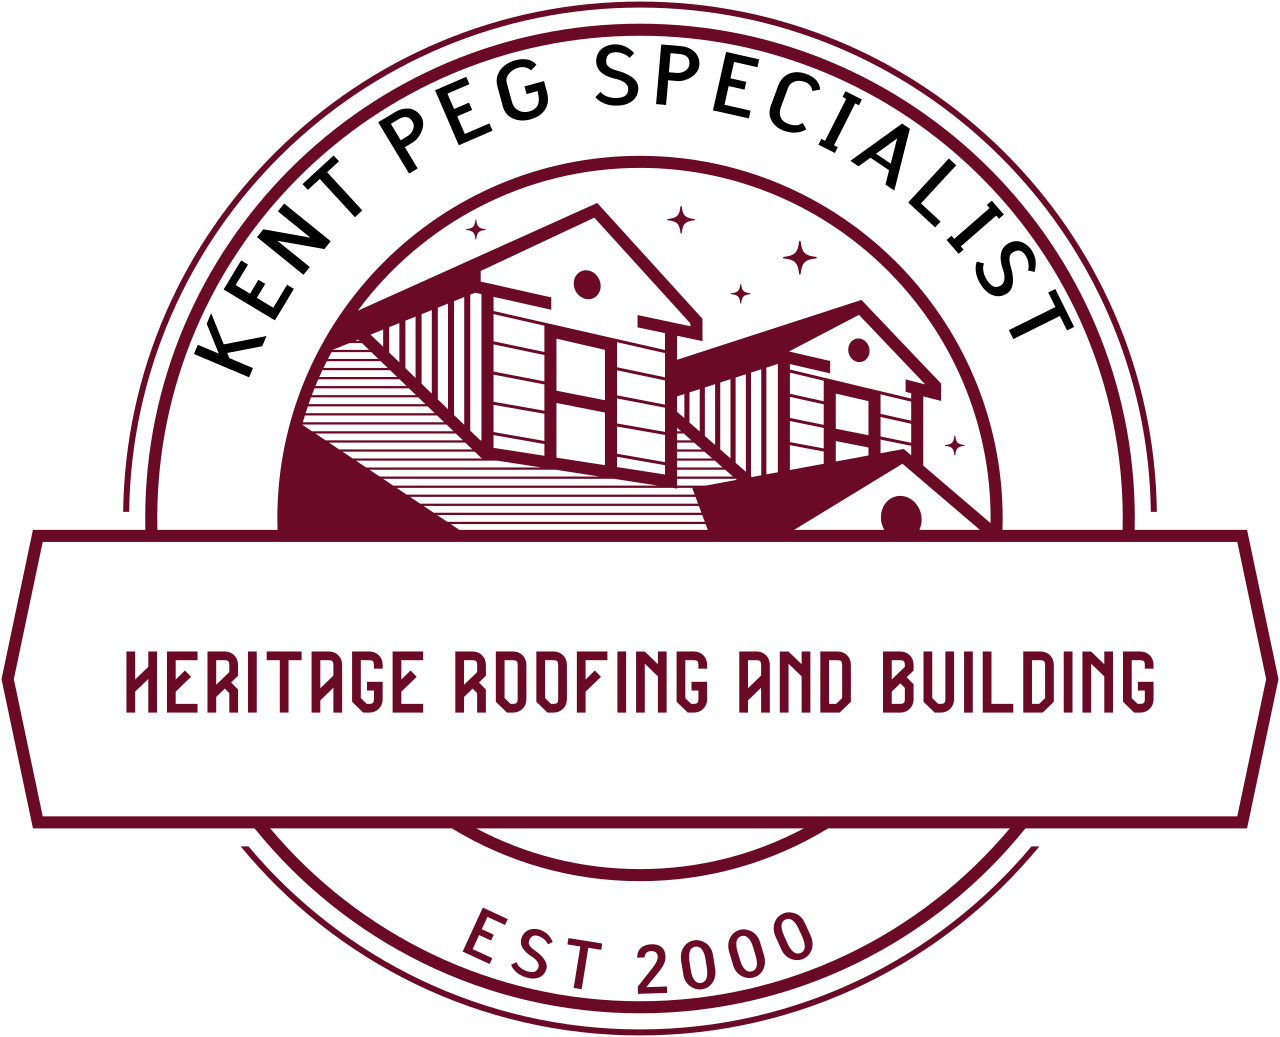 Heritage roofing and building's logo